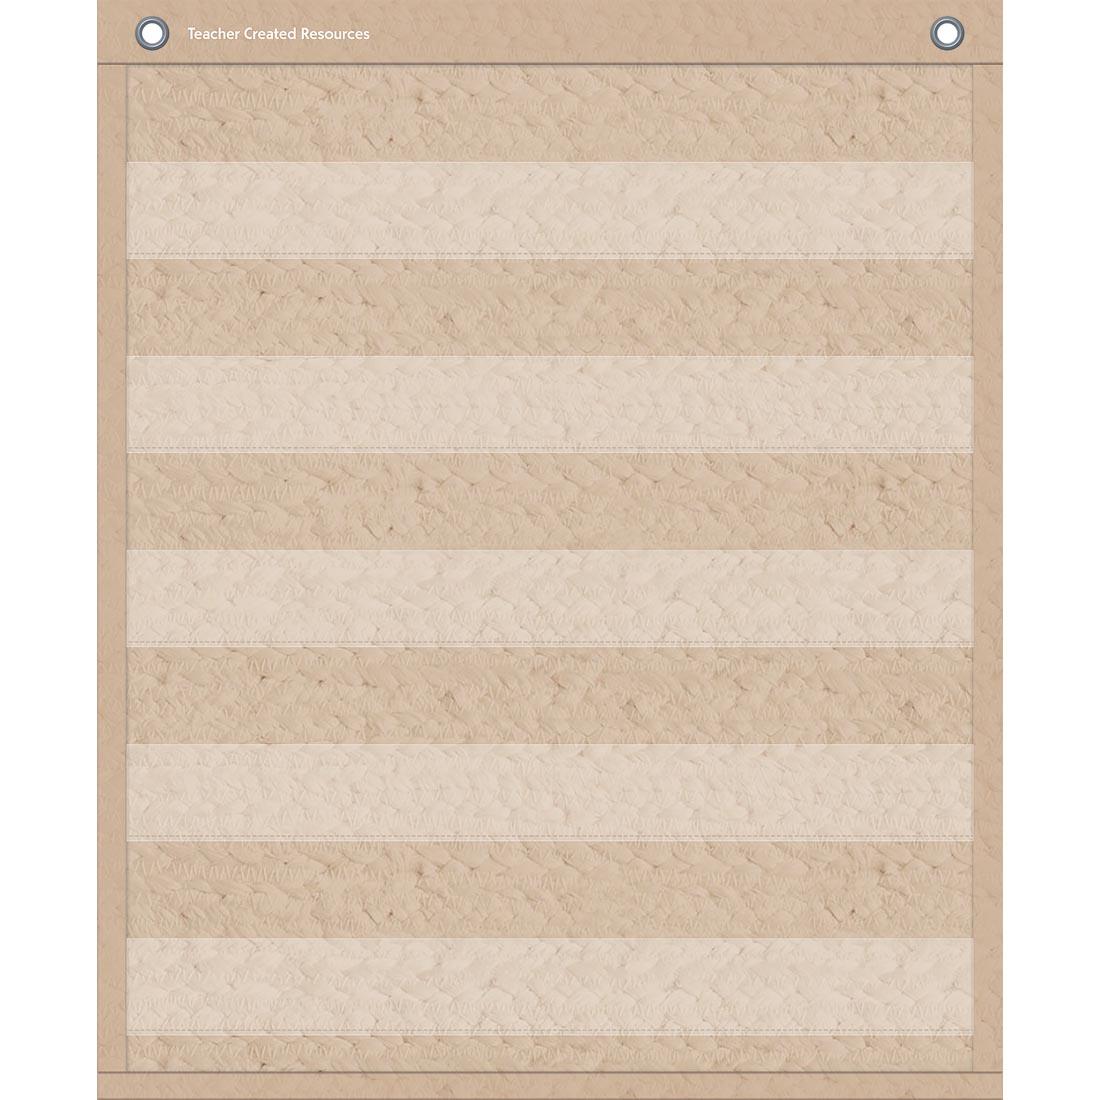 peach pocket chart from the Woven Magnetic Mini Pocket Charts set